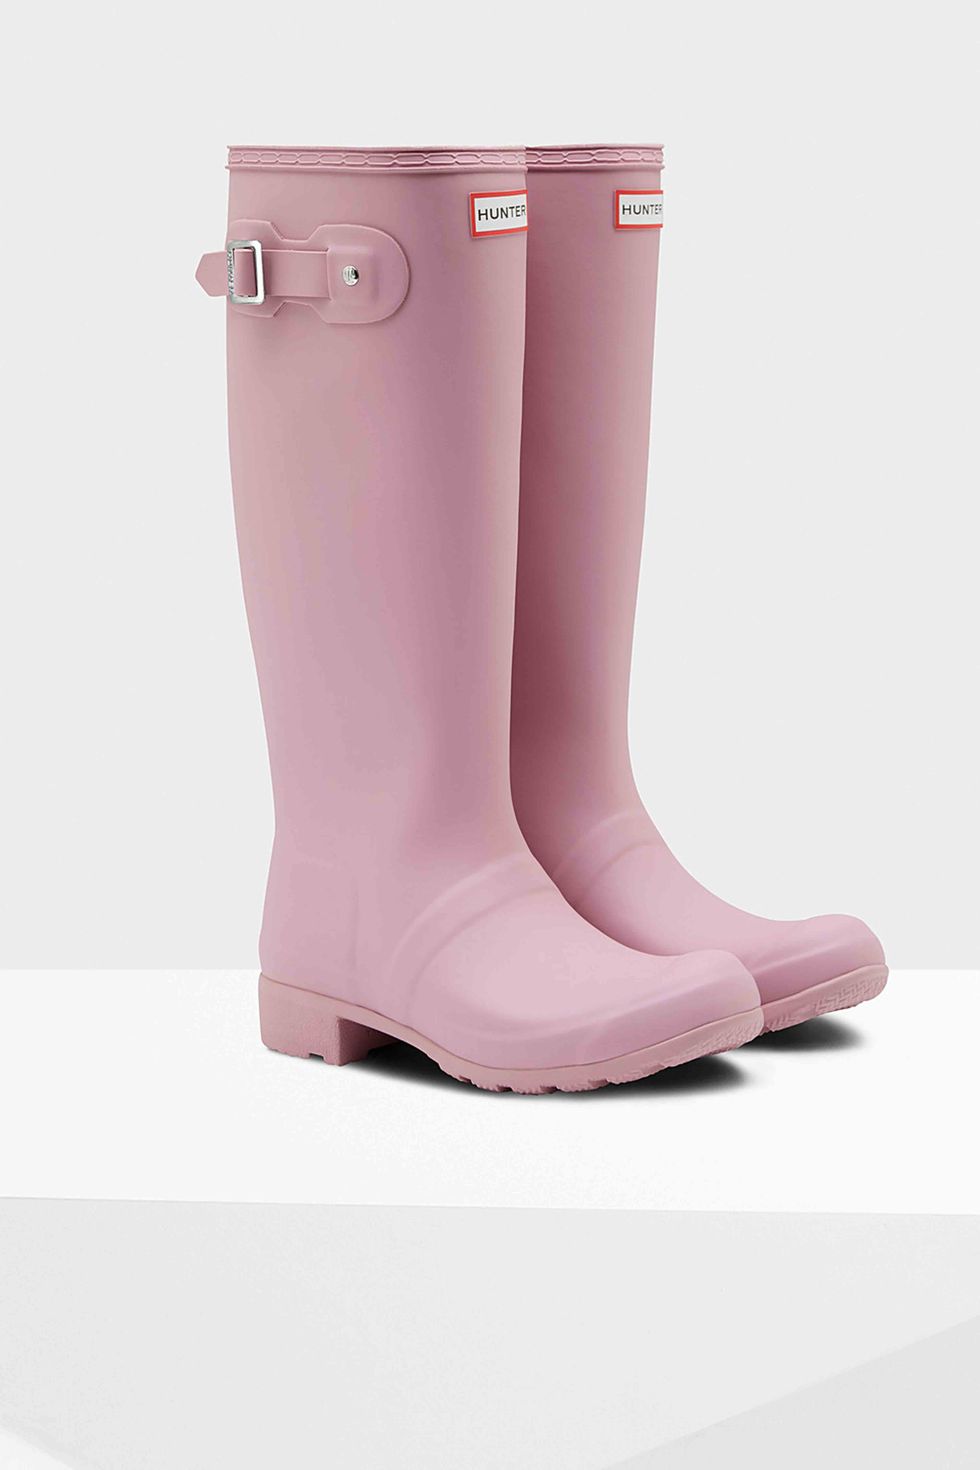 Hunter Boots Sale - What to Shop From Hunter Boots Summer Sale